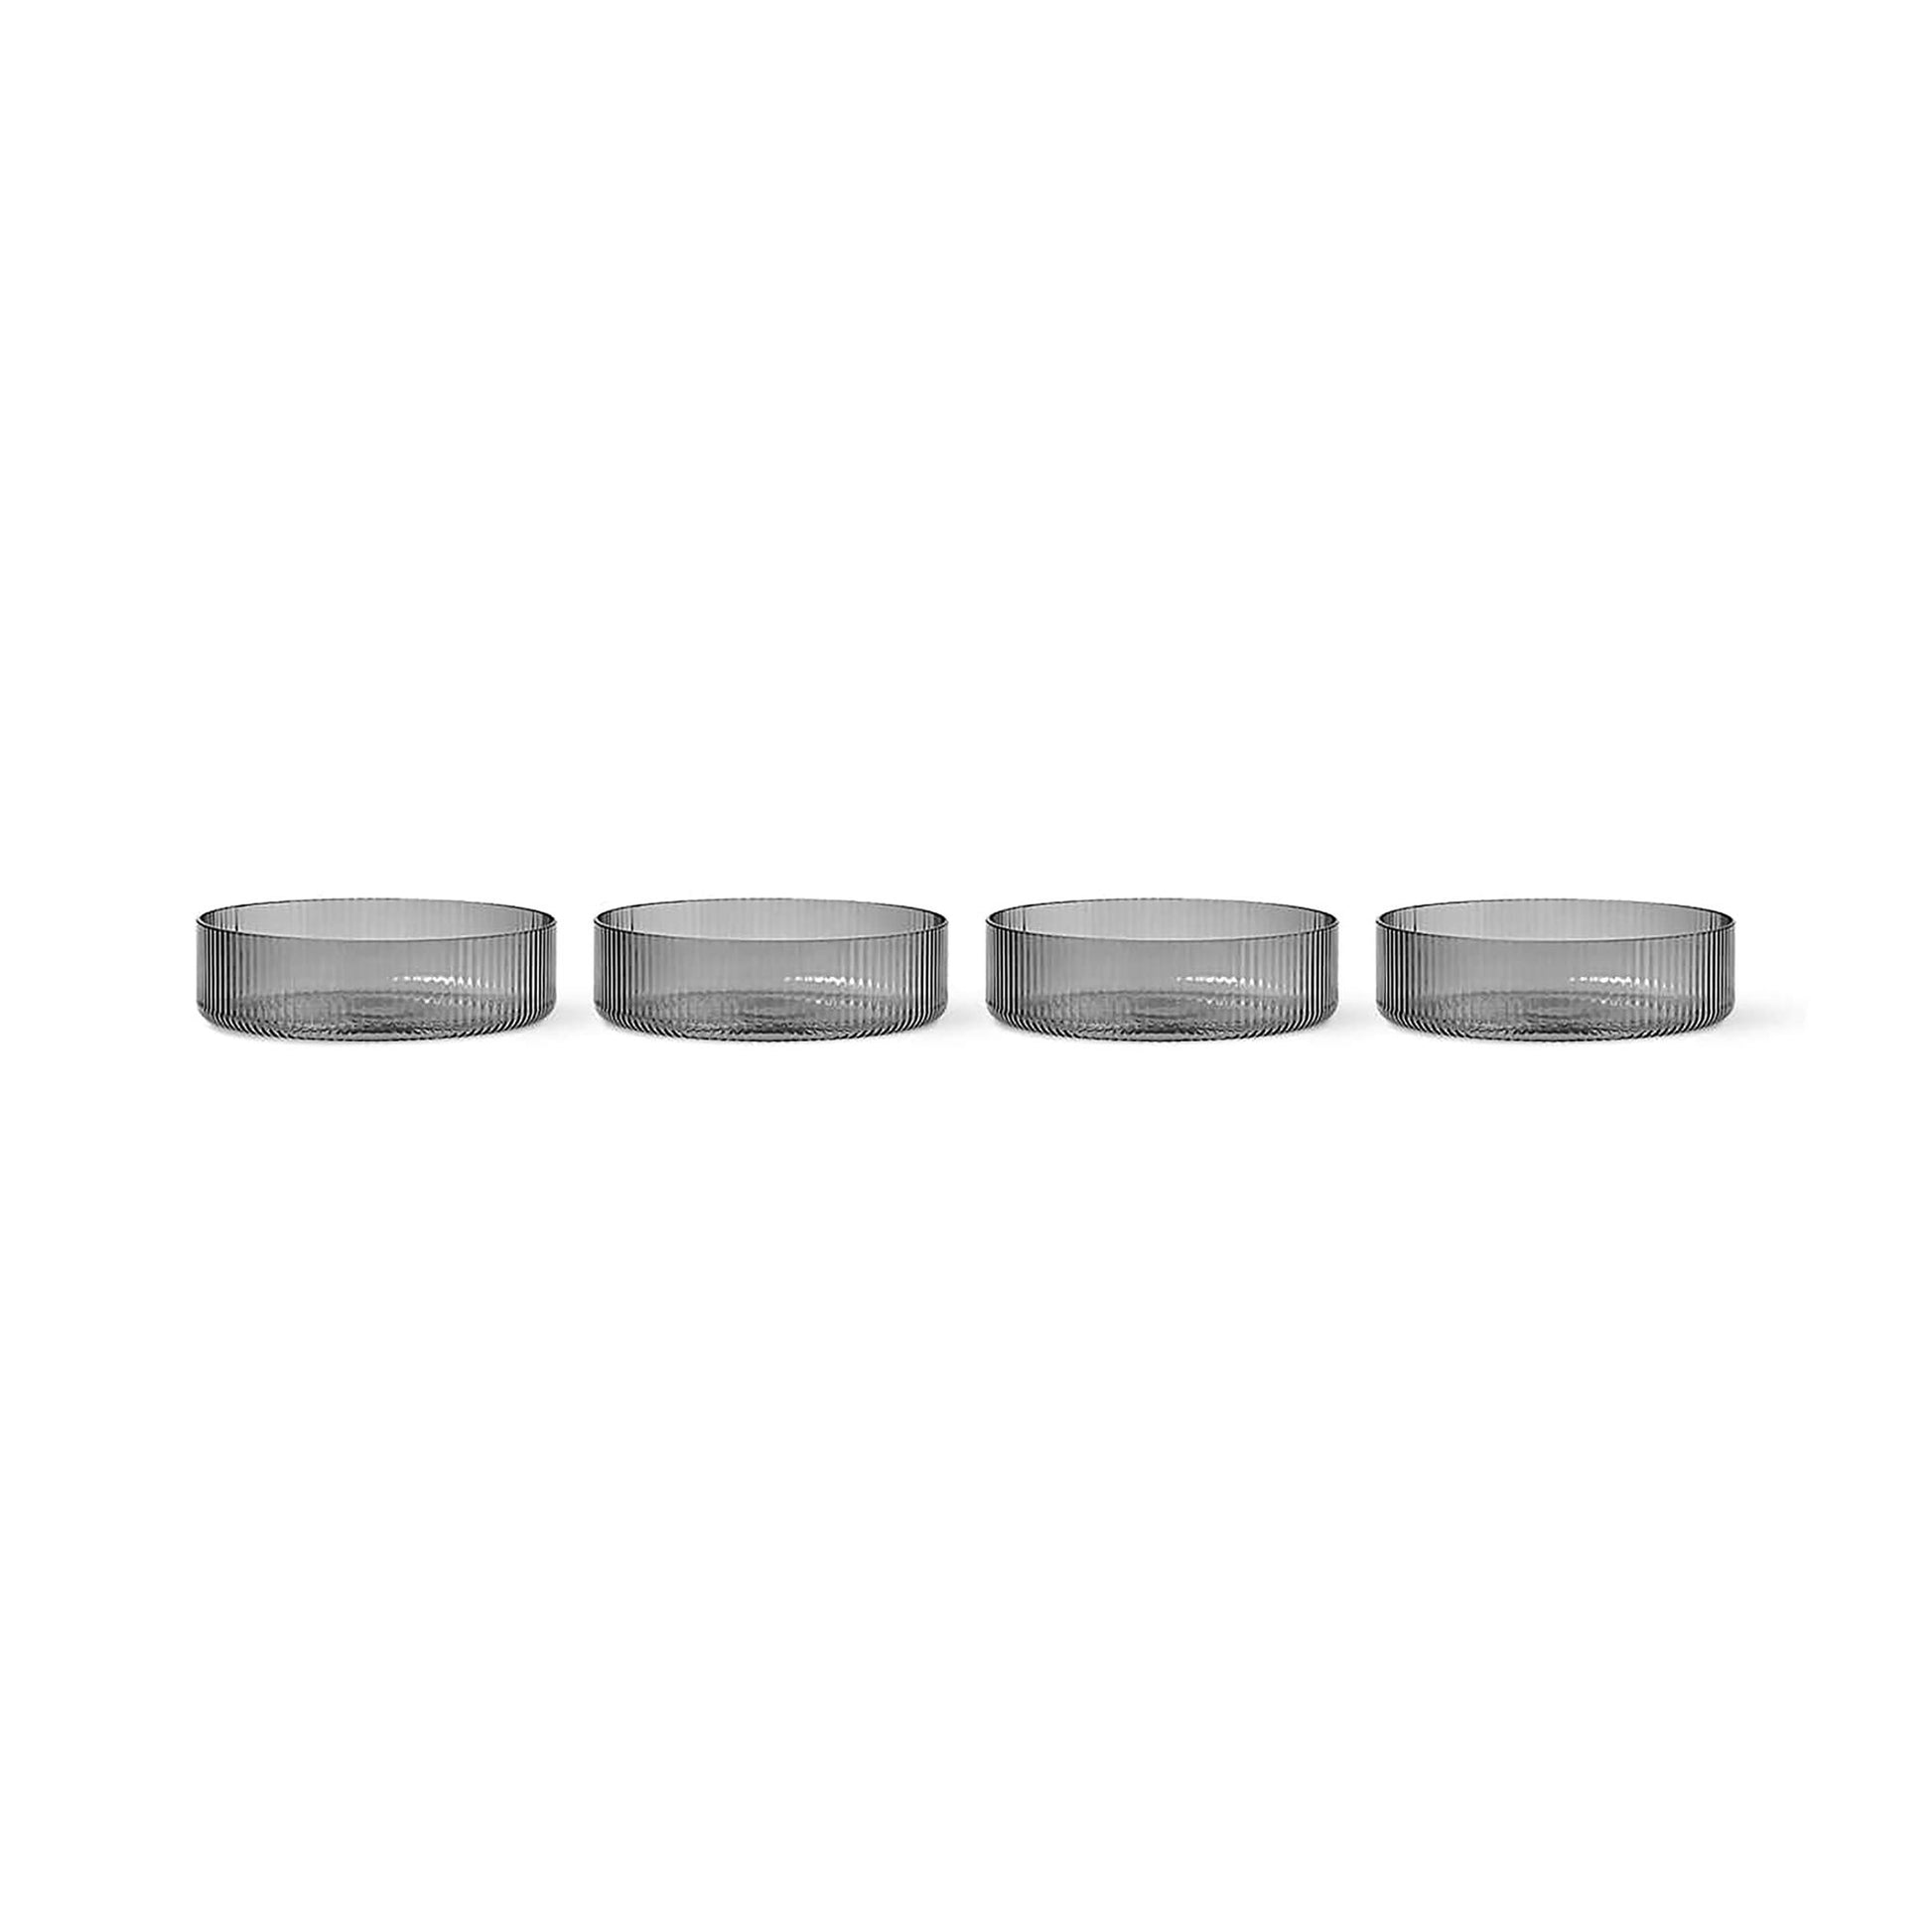 Ripple Serving Bowl Set of 4 by Ferm Living #Smoked